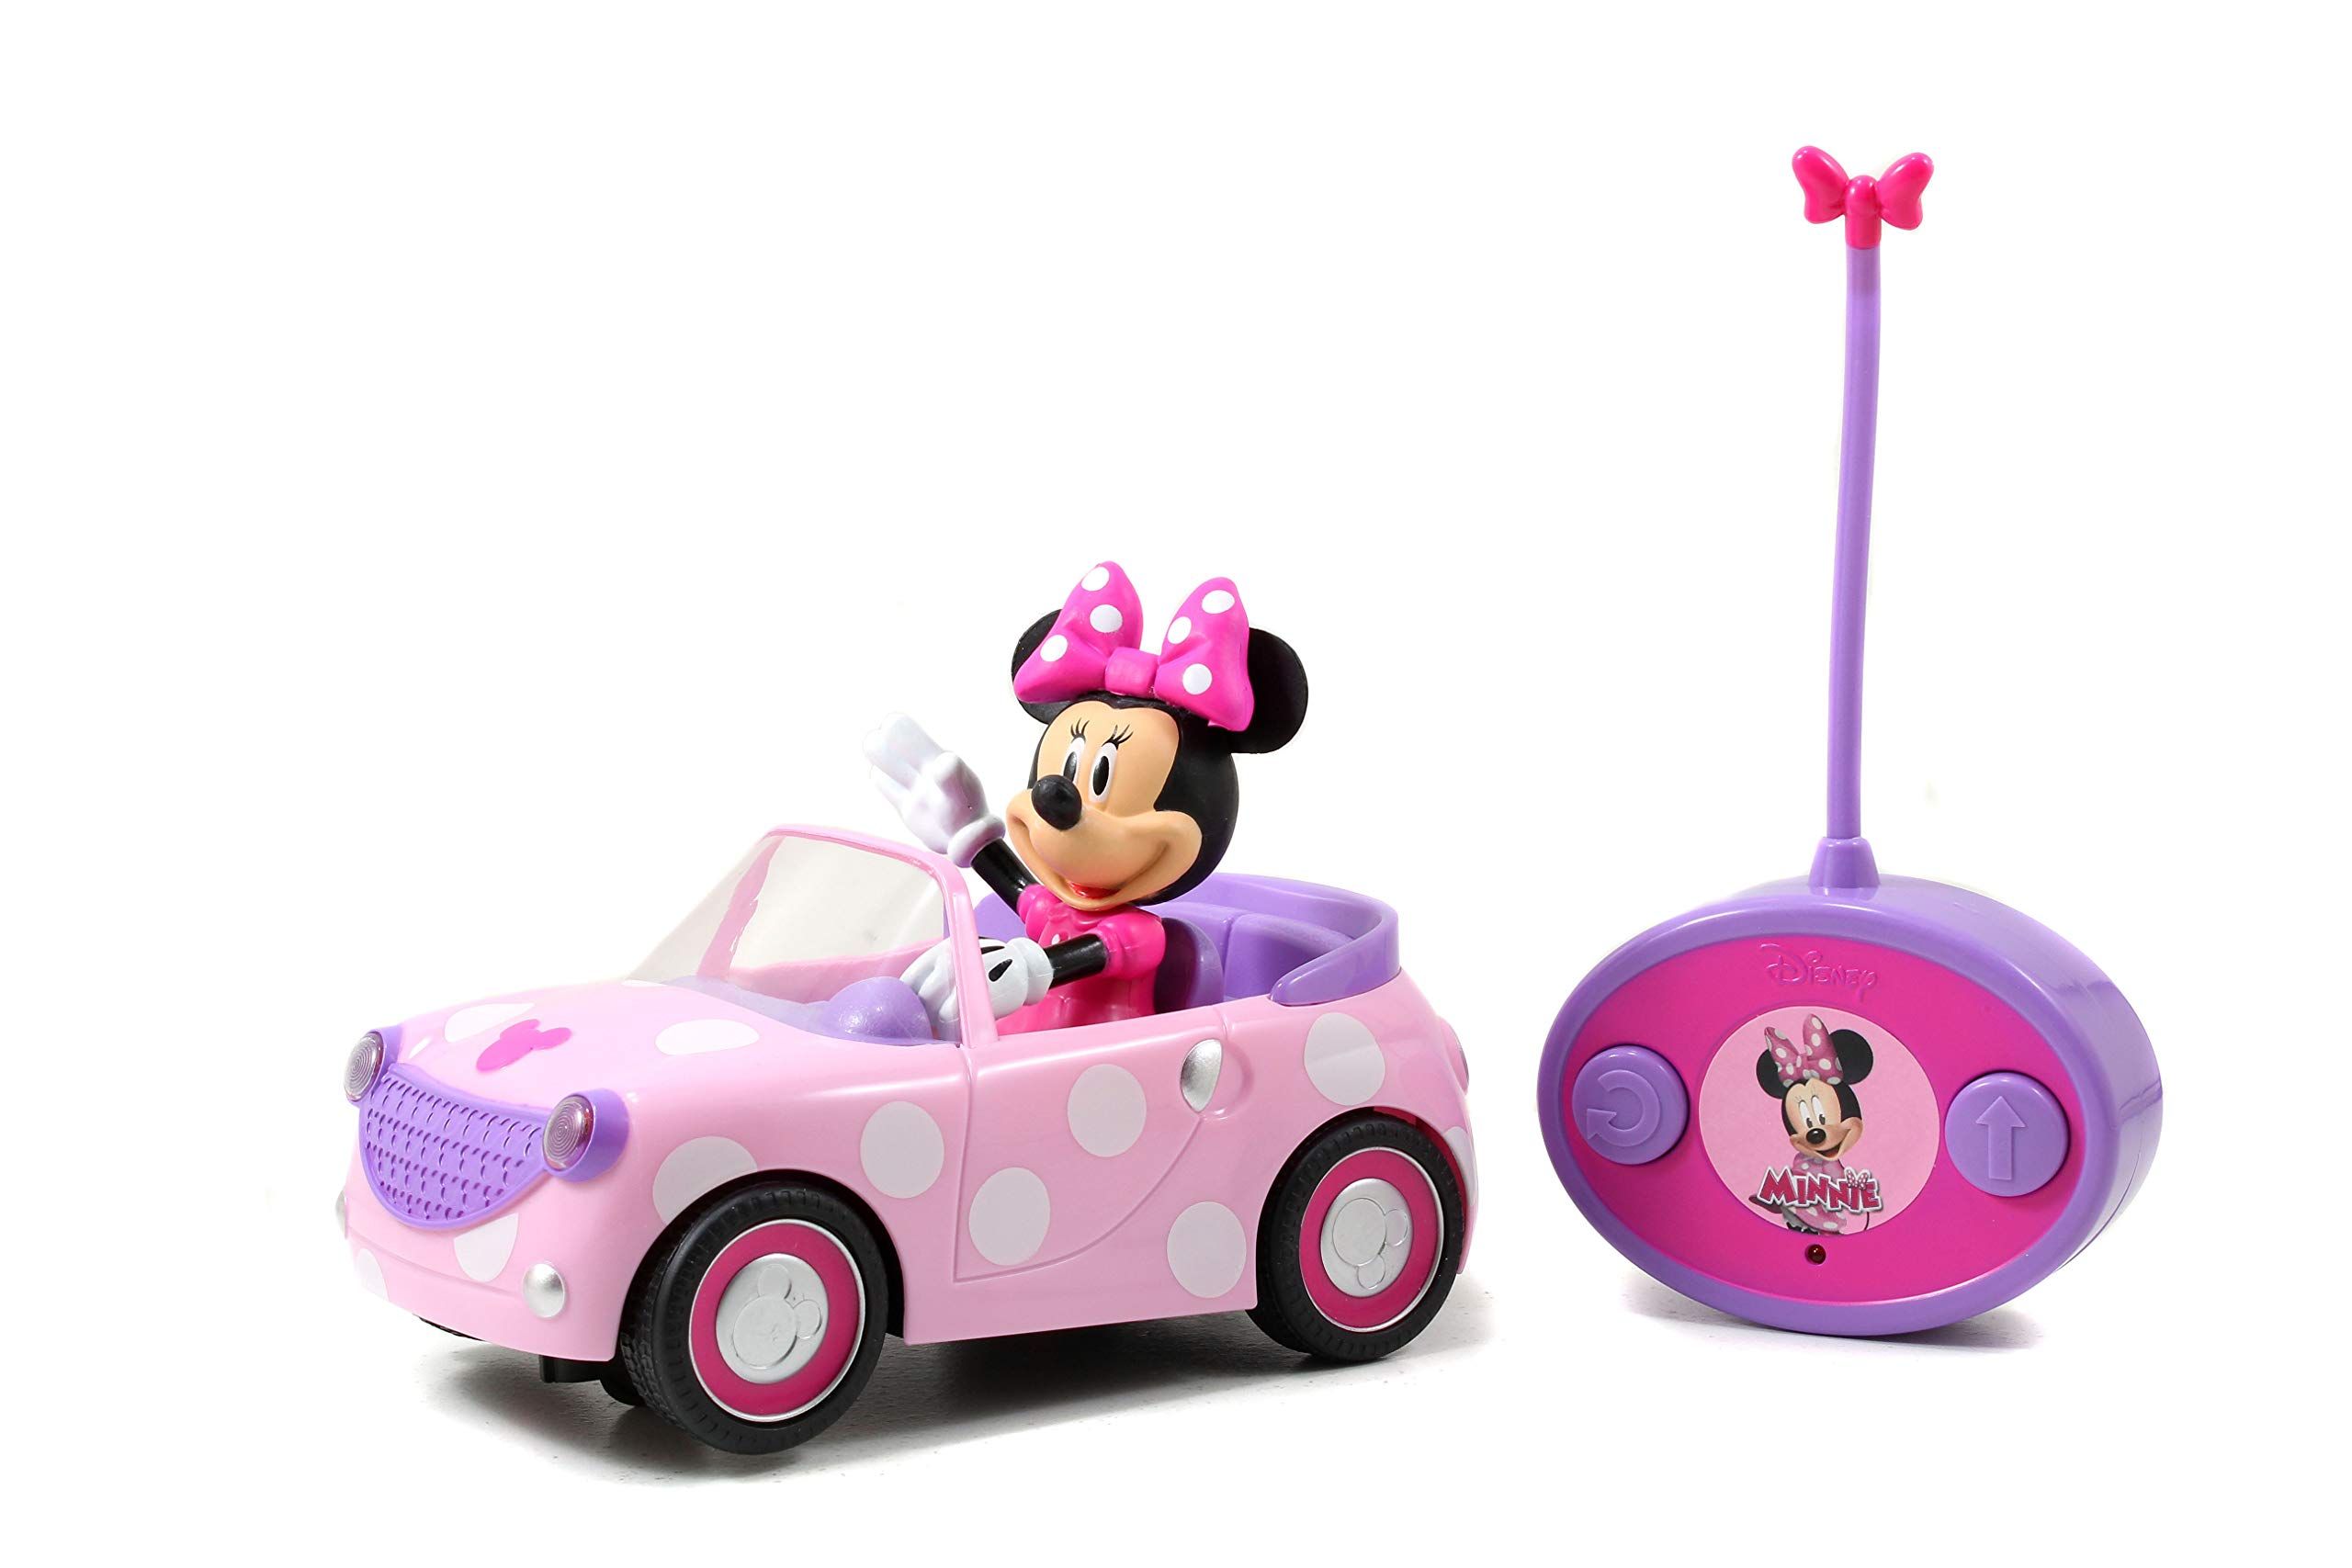 Disney Junior Minnie Mouse Roadster RC Car with Polka Dots, 27 MHz, Pink with White Polka Dots, Stan | Amazon (US)